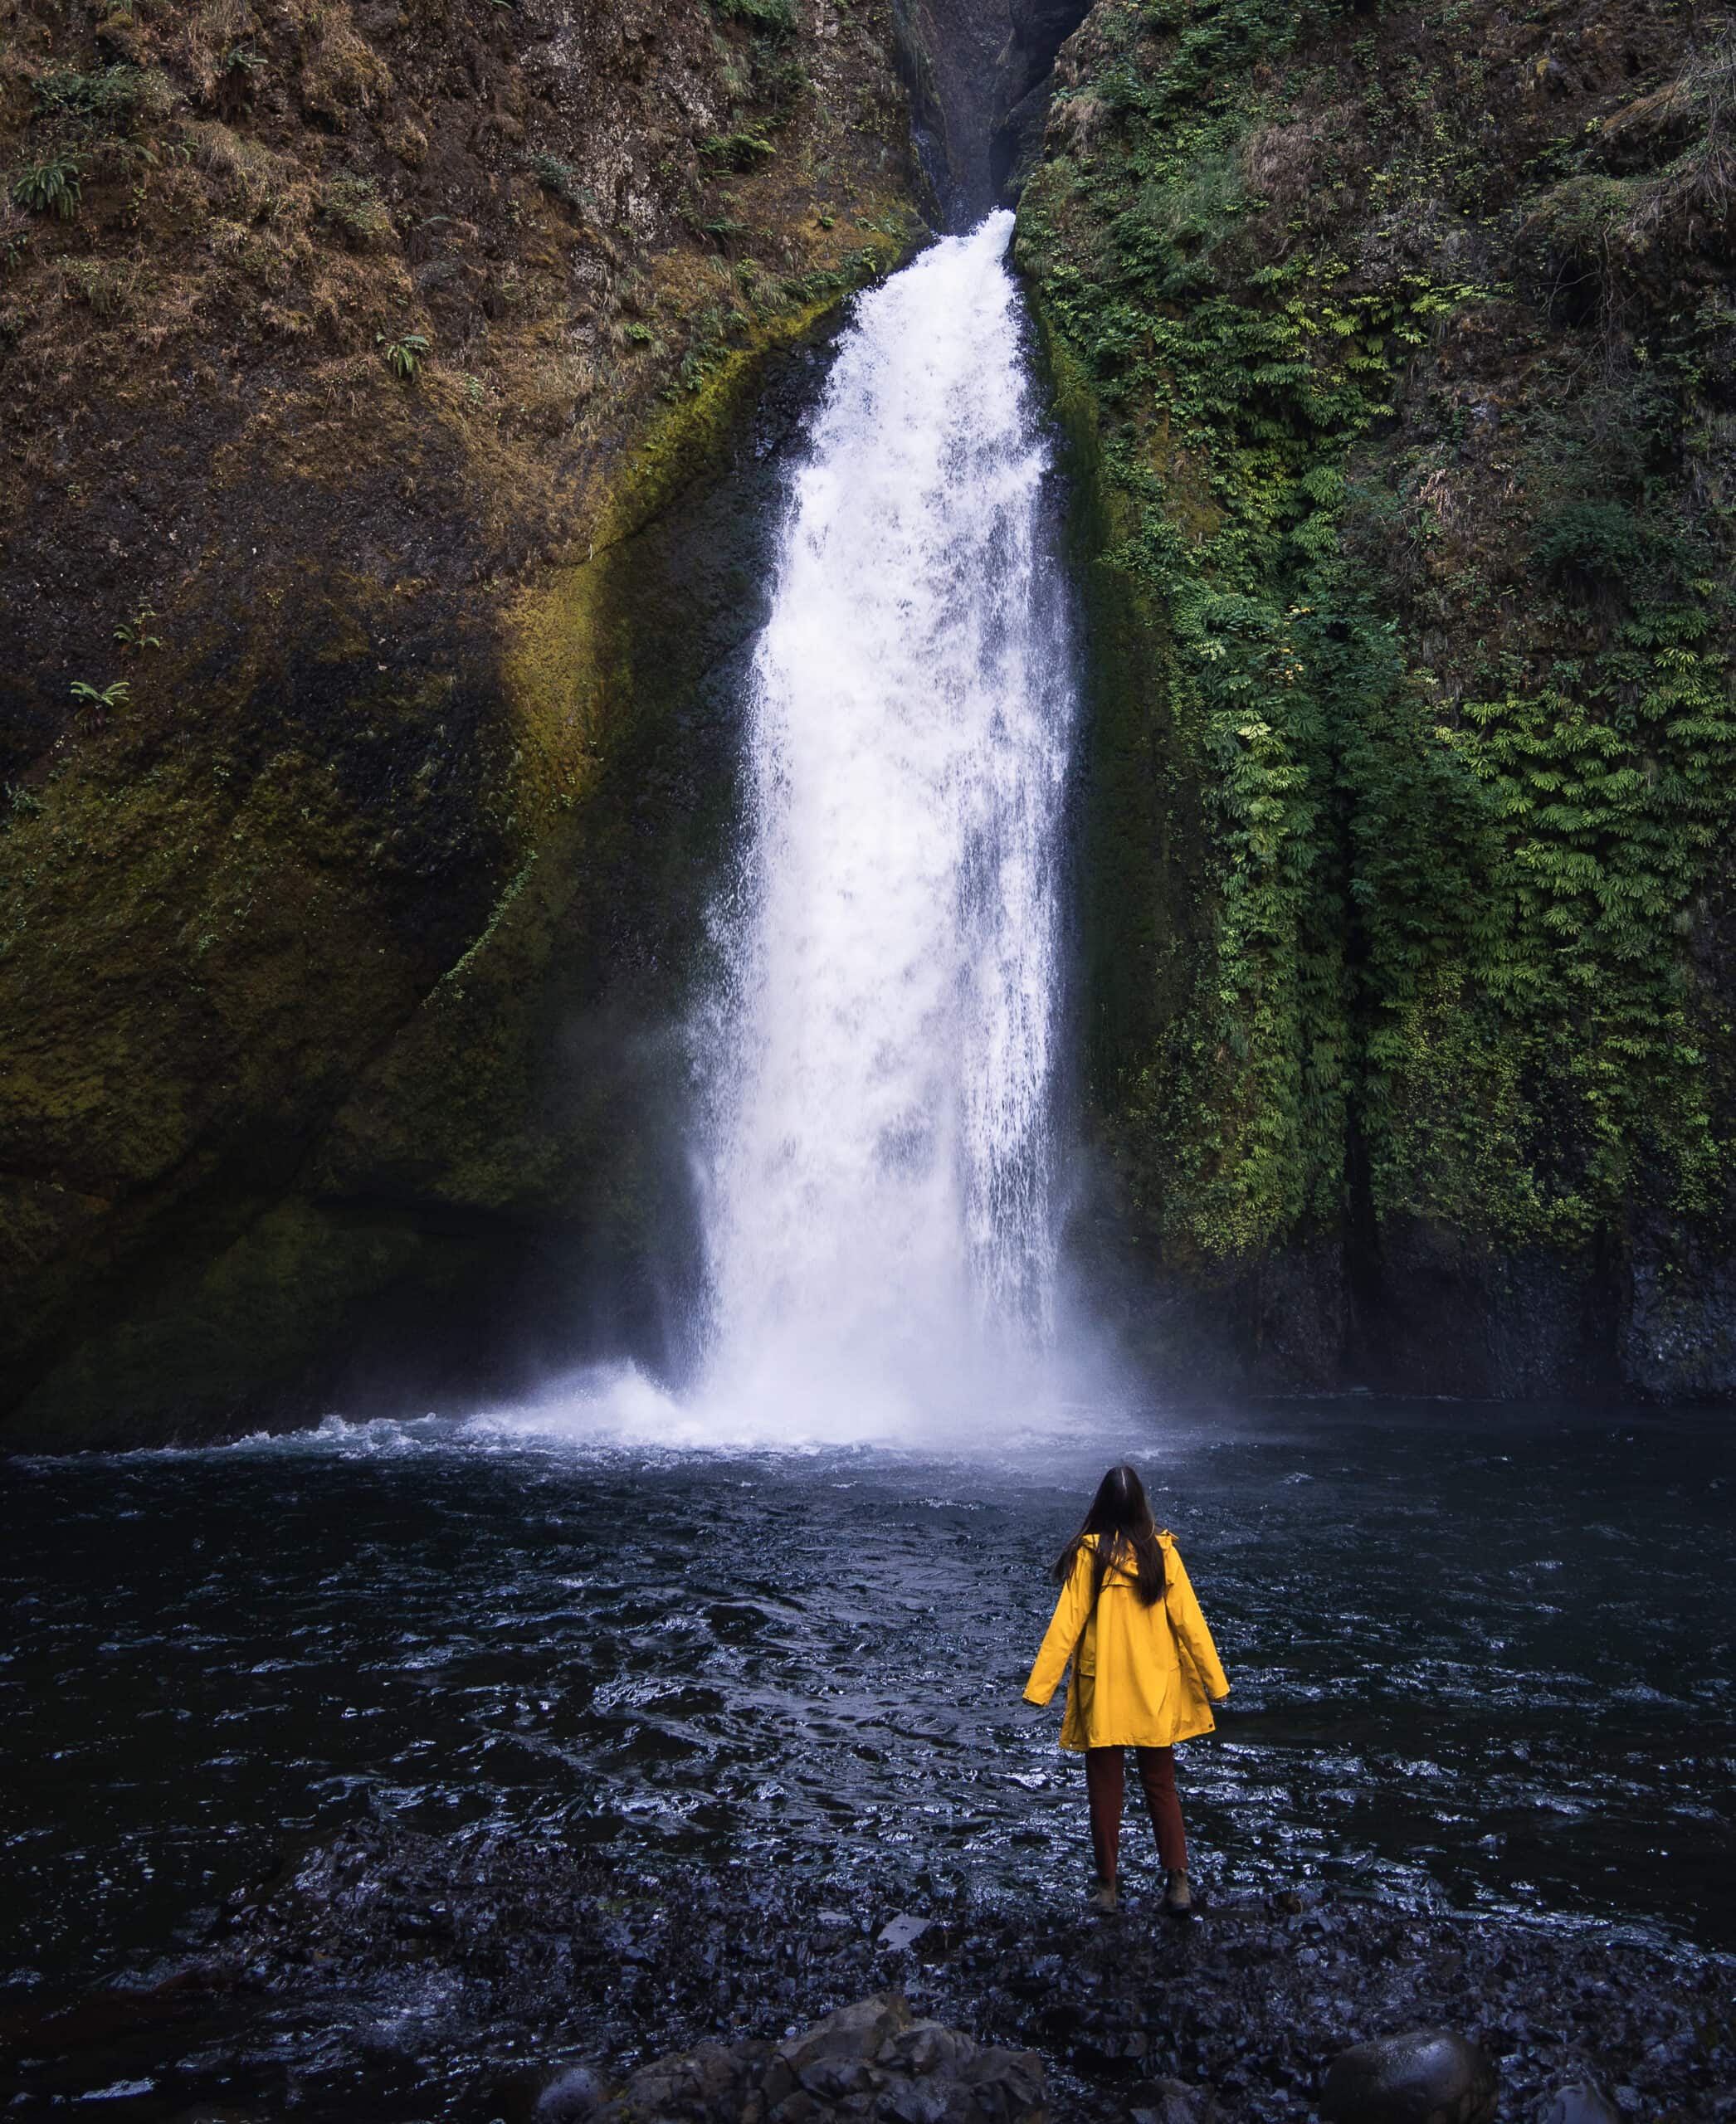 best oregon road trip stops - a view from the bottom of wahclella falls, oregon